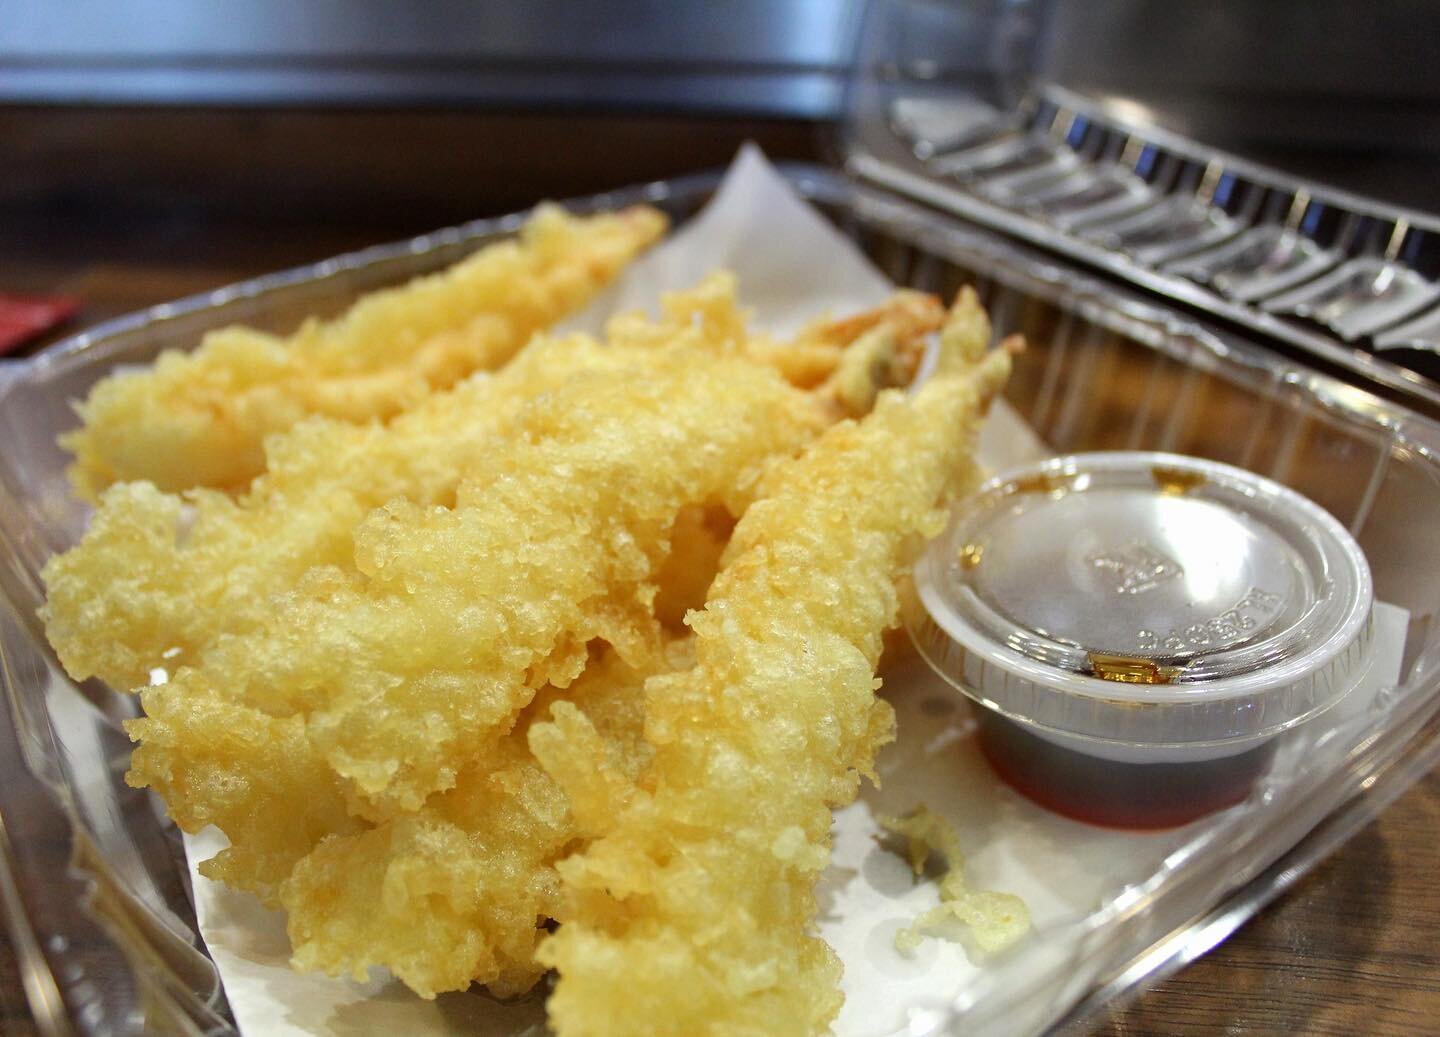 &bull; Shrimp Tempura (packed for carry out) &bull;

photo creds:
@jayniescameraroll

COME VISIT US!
📍 find us on yelp! https://m.yelp.com/biz/tsukimi-austin-2?osq=tsukimi
📍find us on facebook! https://m.facebook.com/tsukimiaustin/
🥢 see our menu!